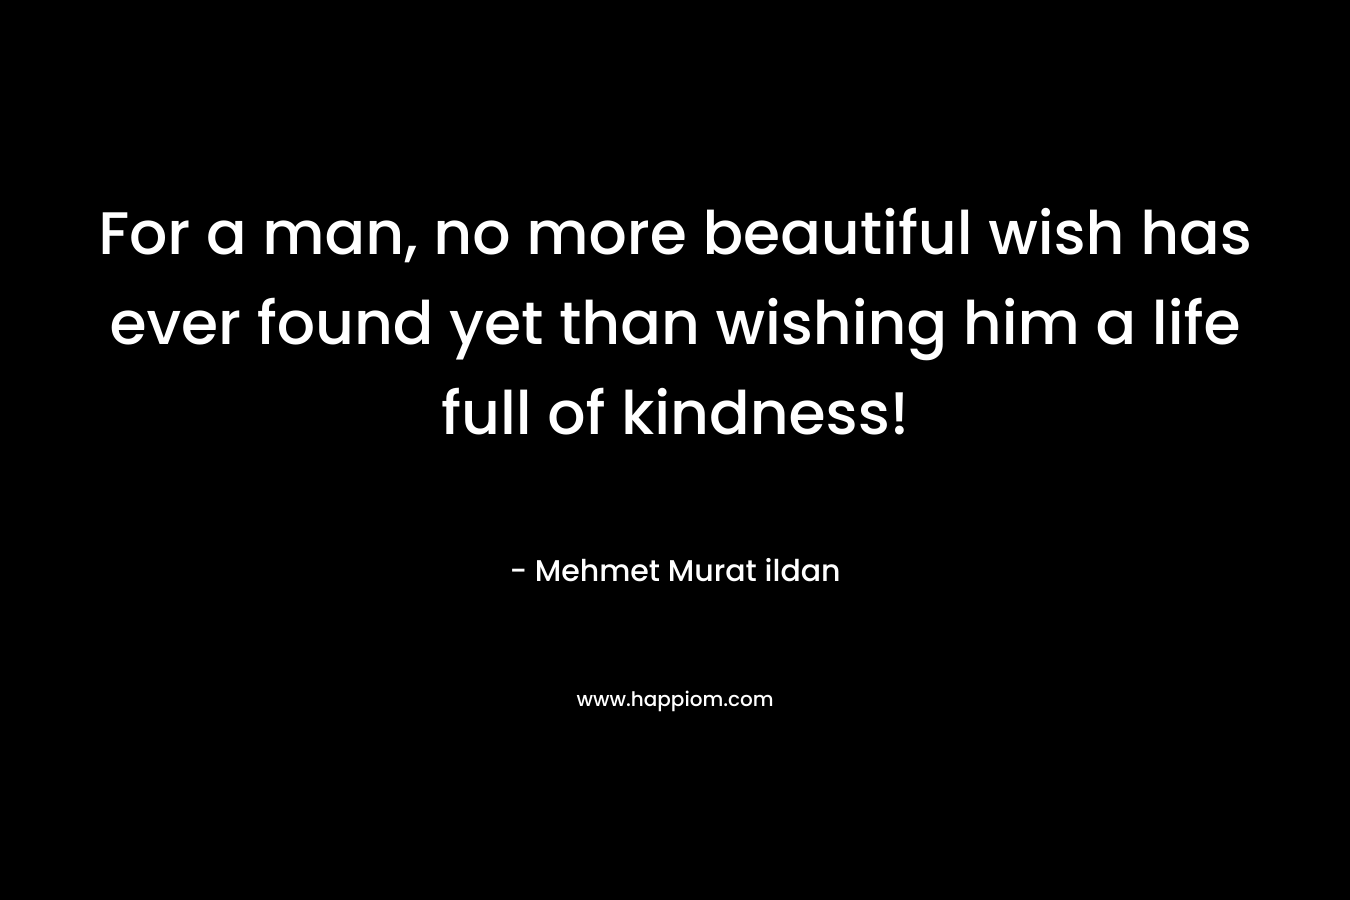 For a man, no more beautiful wish has ever found yet than wishing him a life full of kindness!